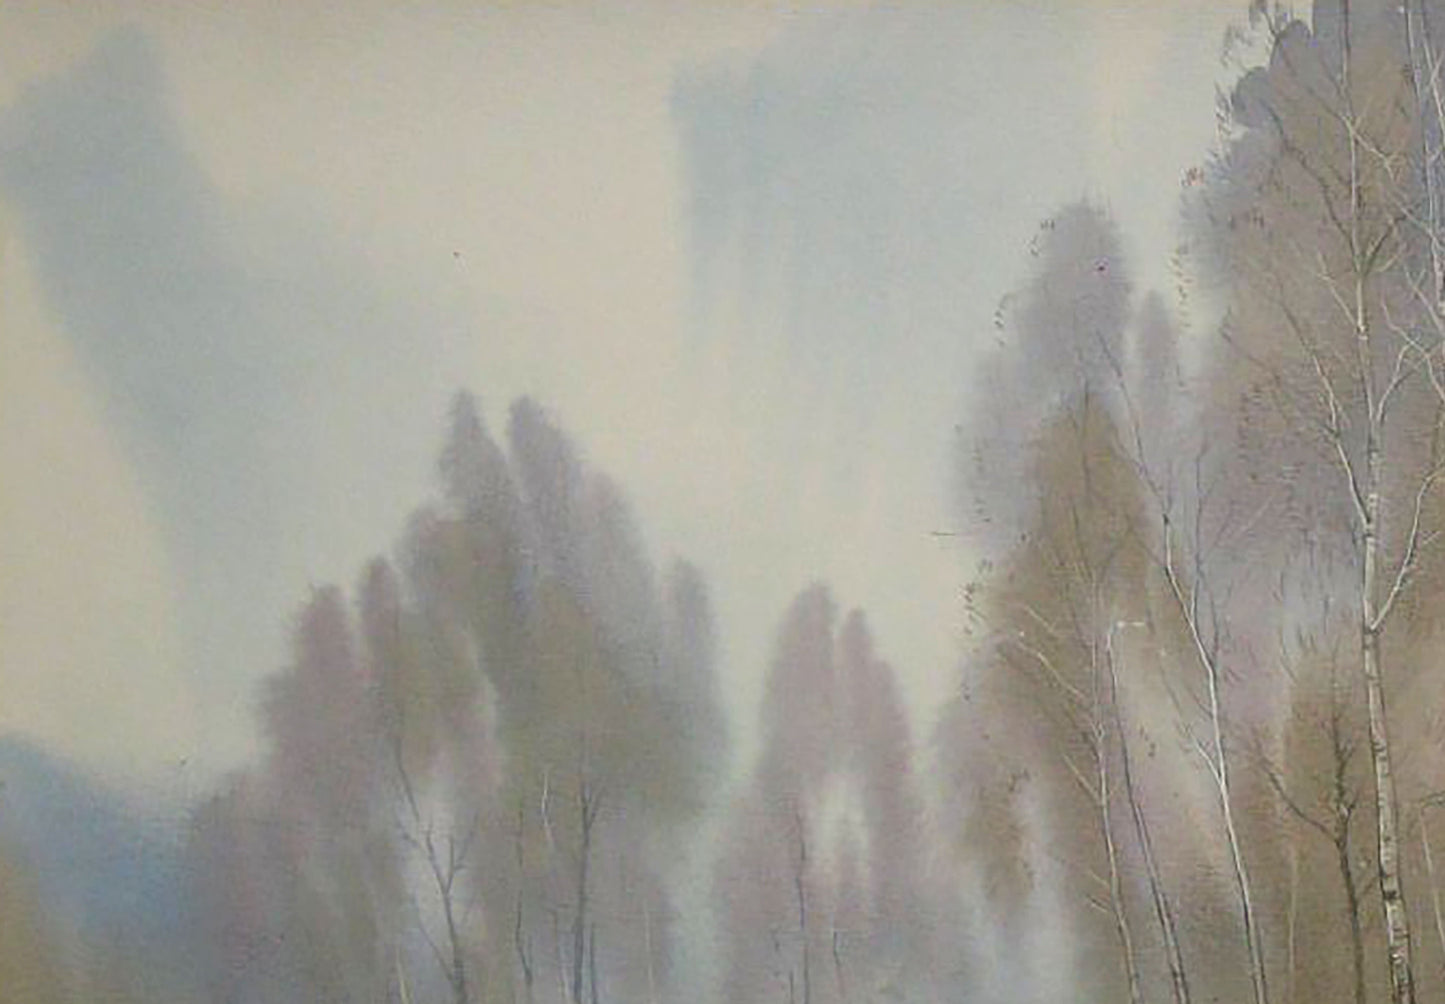 Watercolor painting April birch thicket Valery Savenets